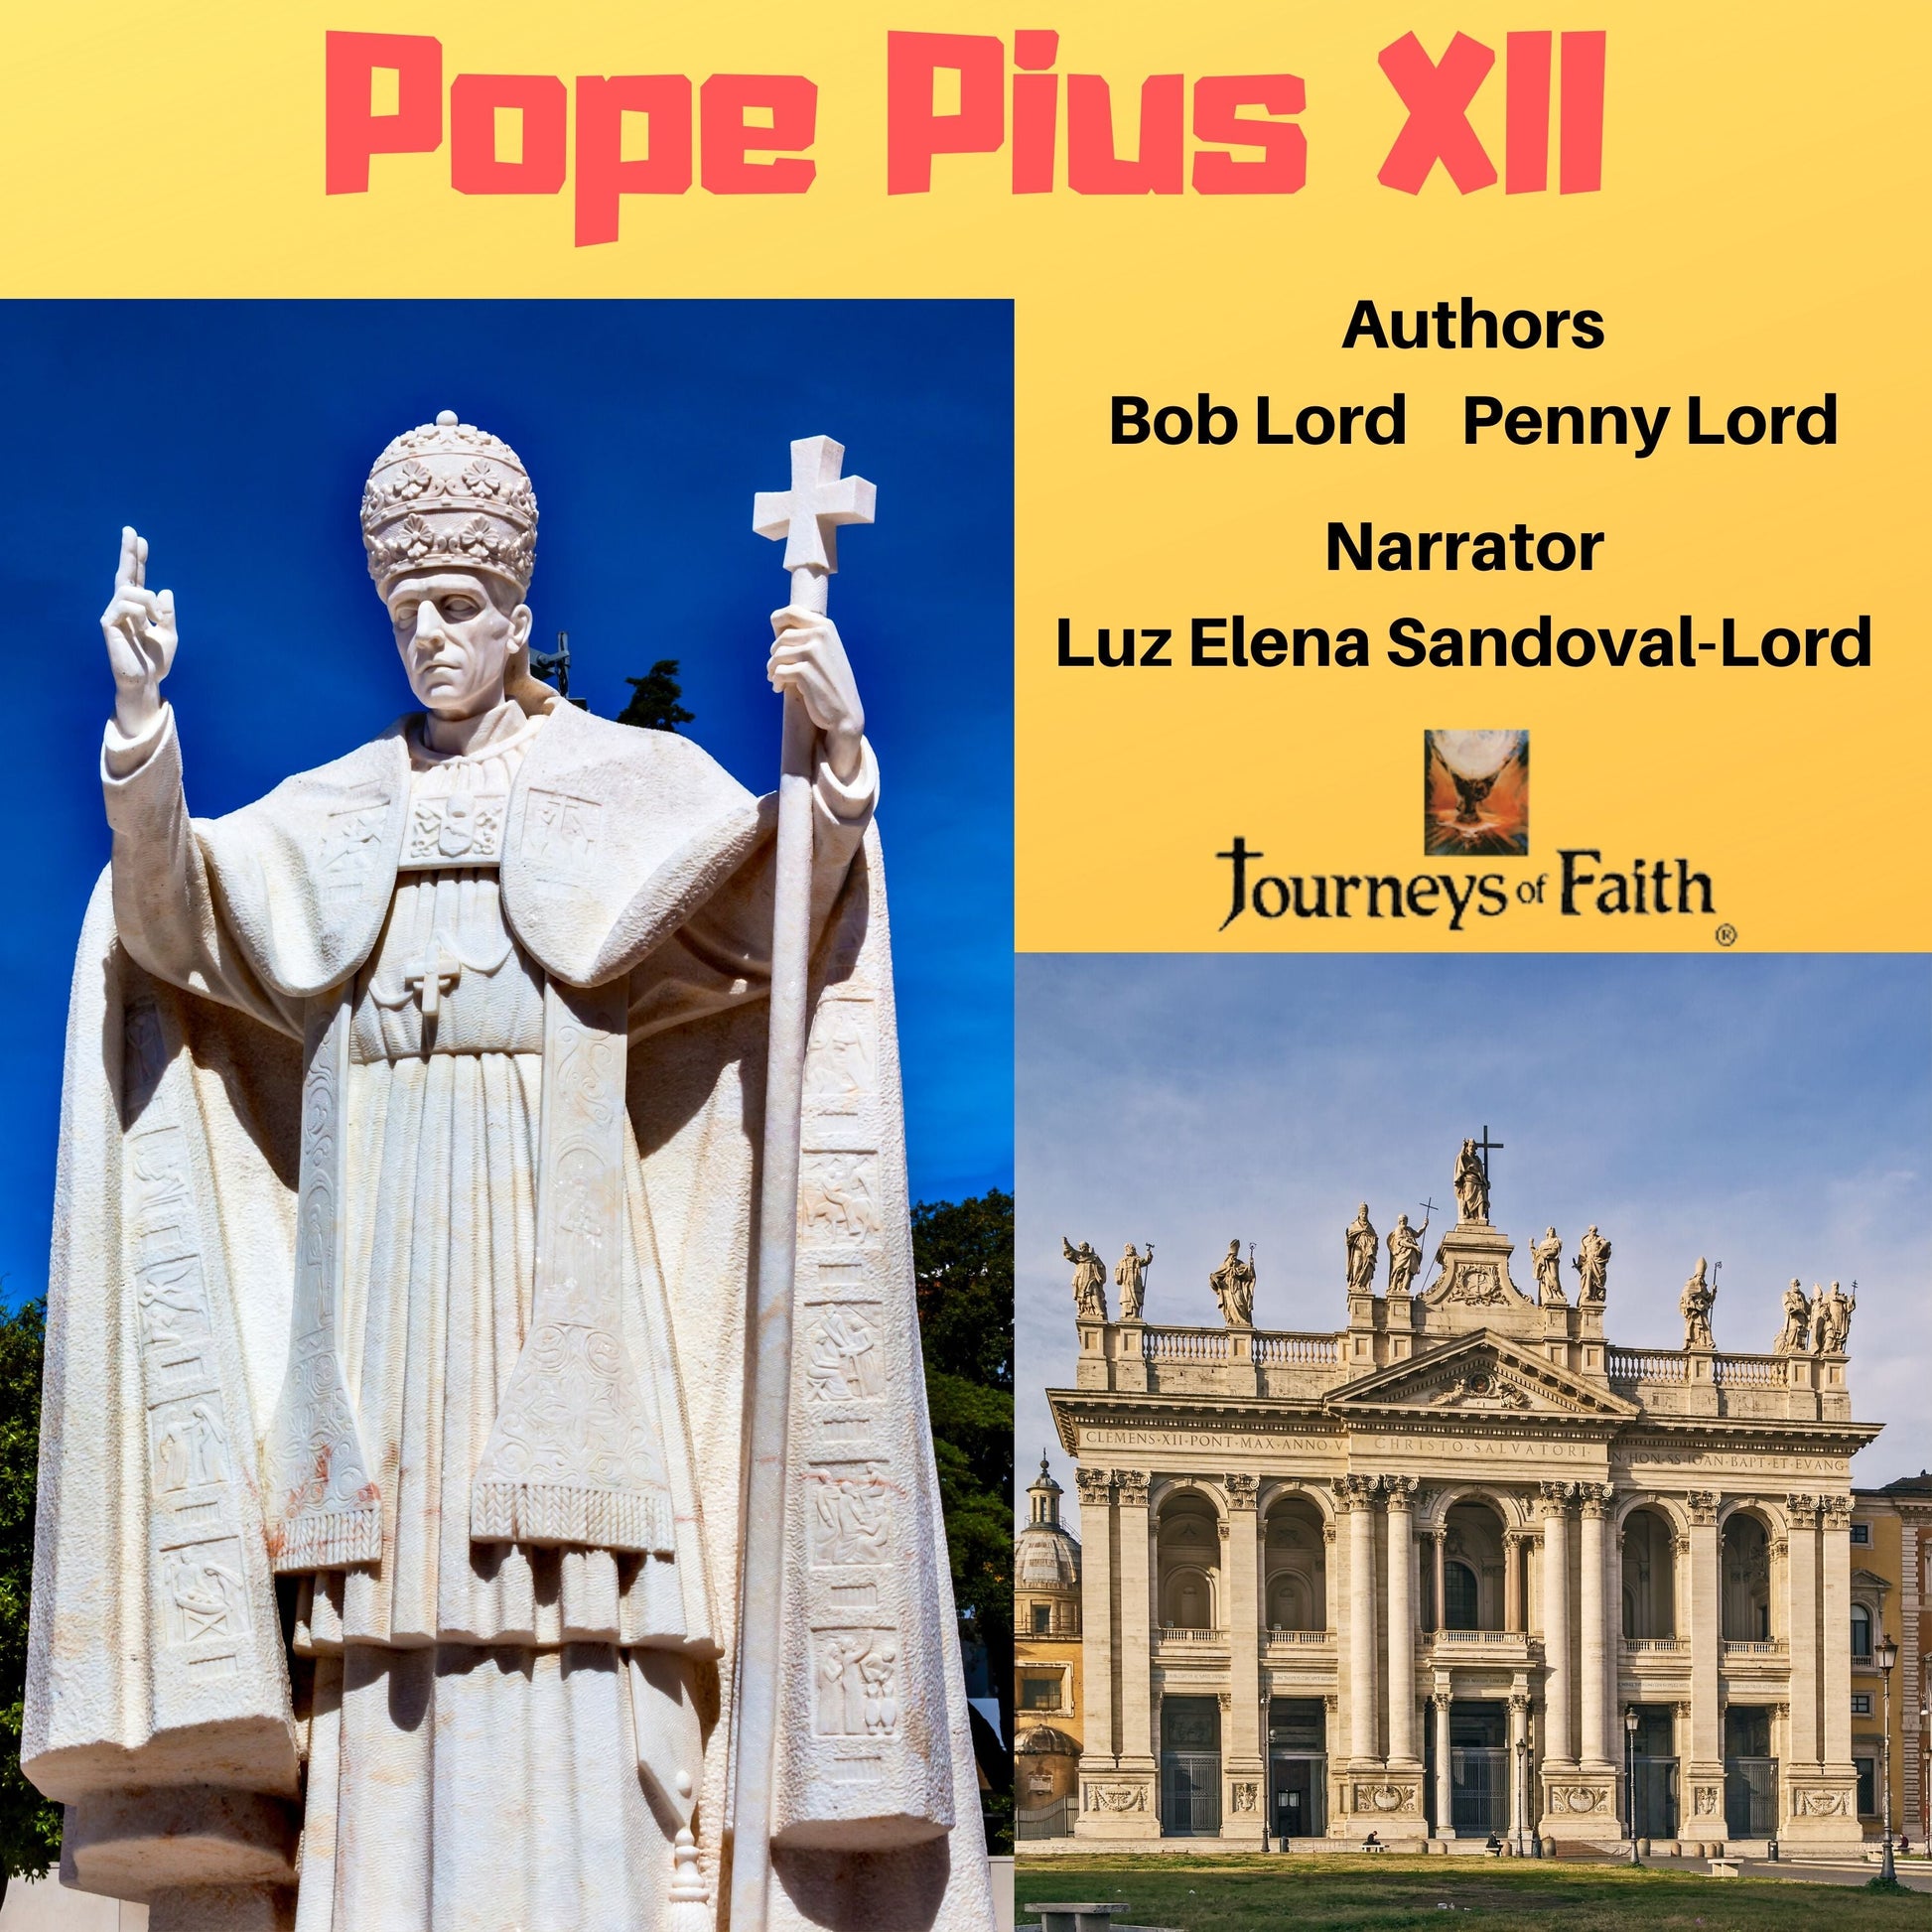 Heroes Popes in Hard Times ebook PDF - Bob and Penny Lord